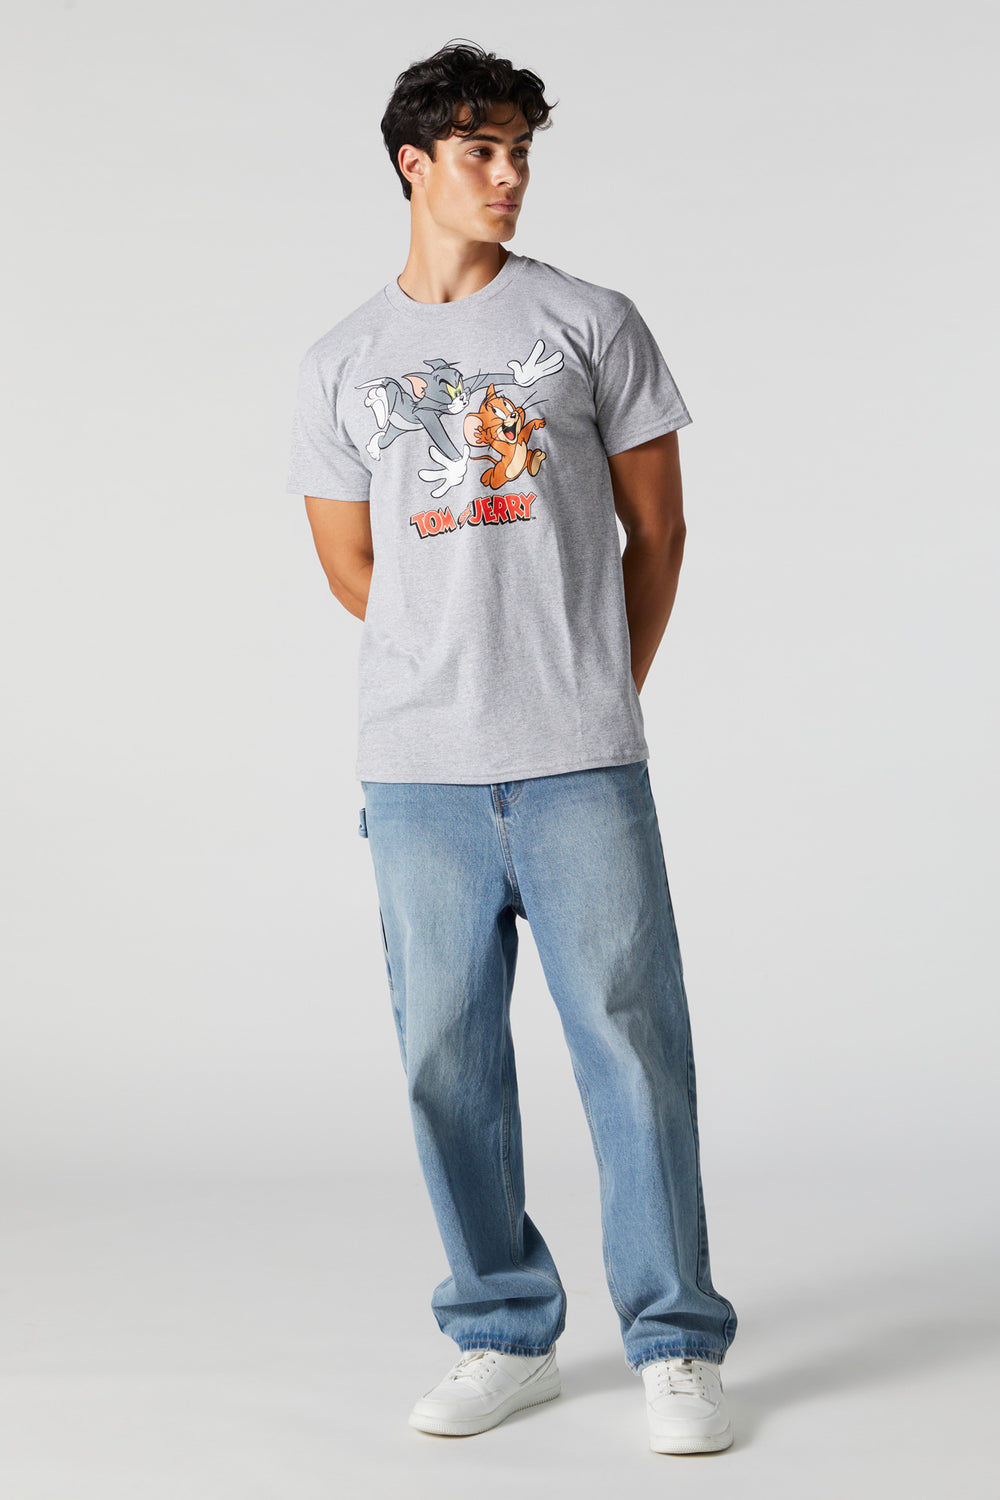 Tom and Jerry Graphic T-Shirt Tom and Jerry Graphic T-Shirt 4